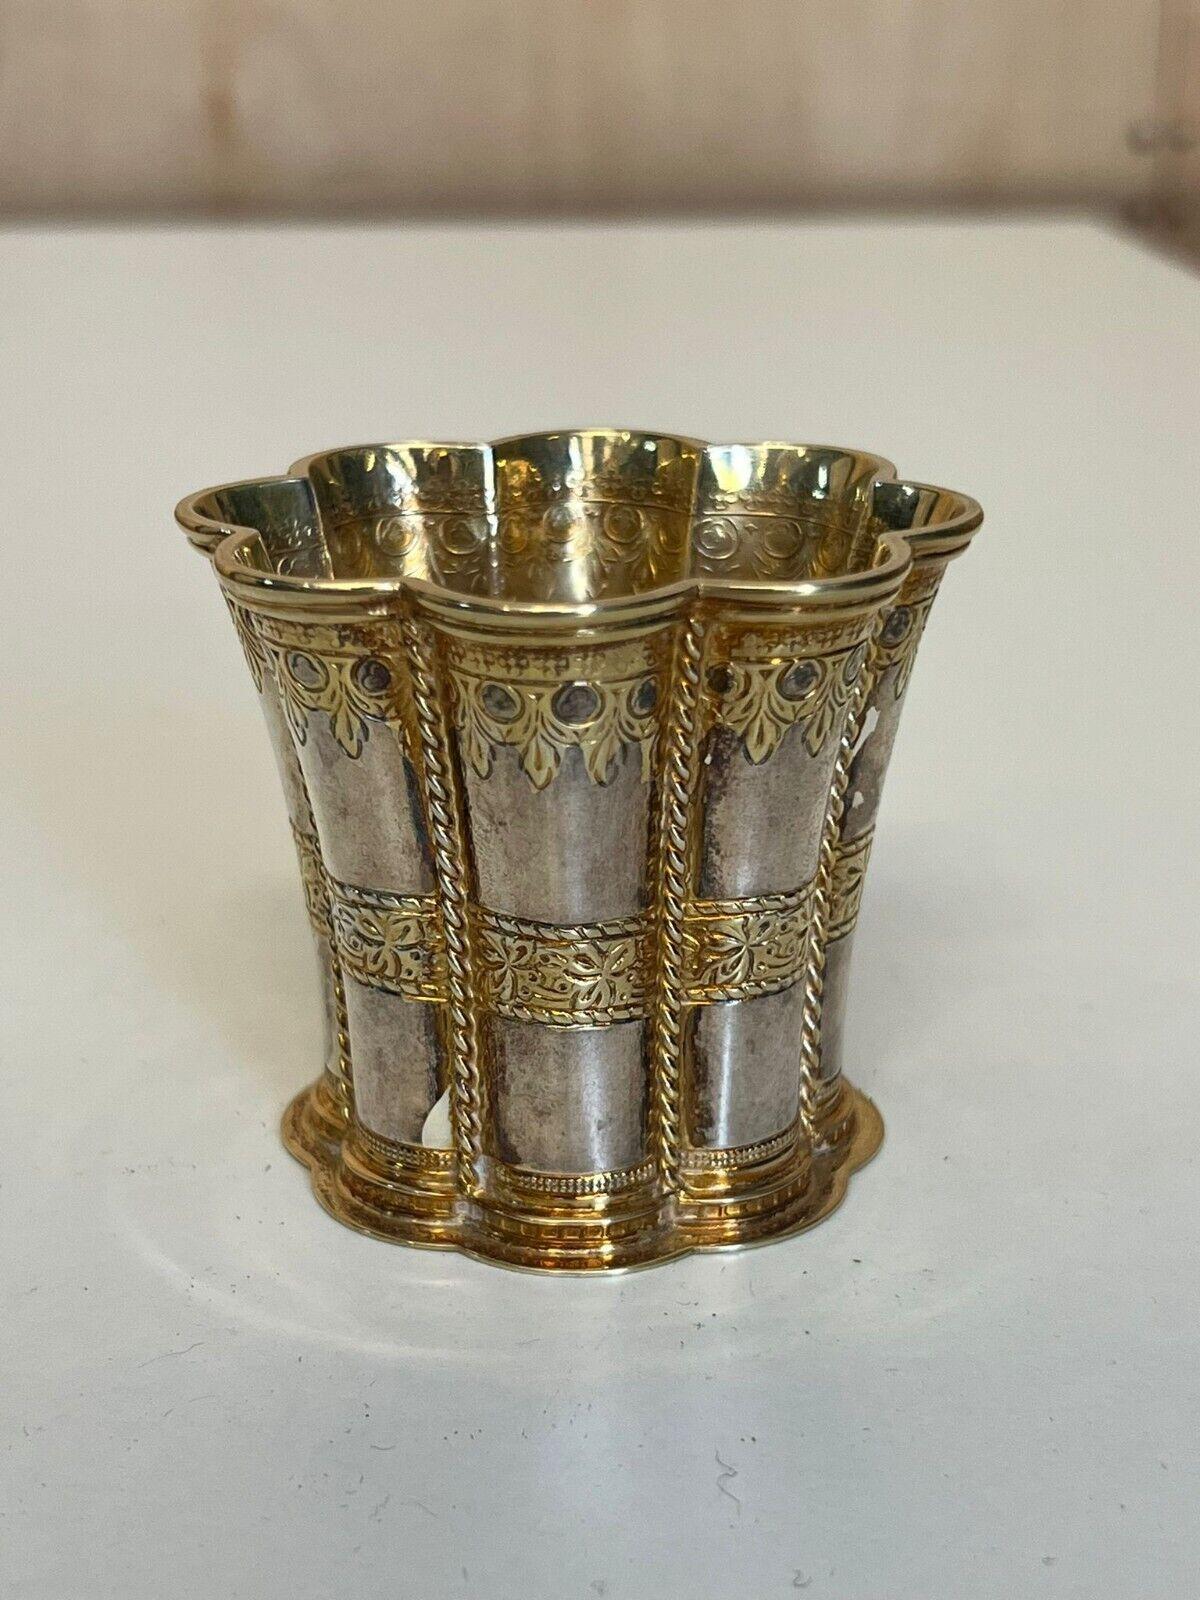 SOLID STERLING SiLVER 1967 DATED FULLY HALLMARKED QUEEN MARGRETHE CUP GOLD GILT For Sale 3